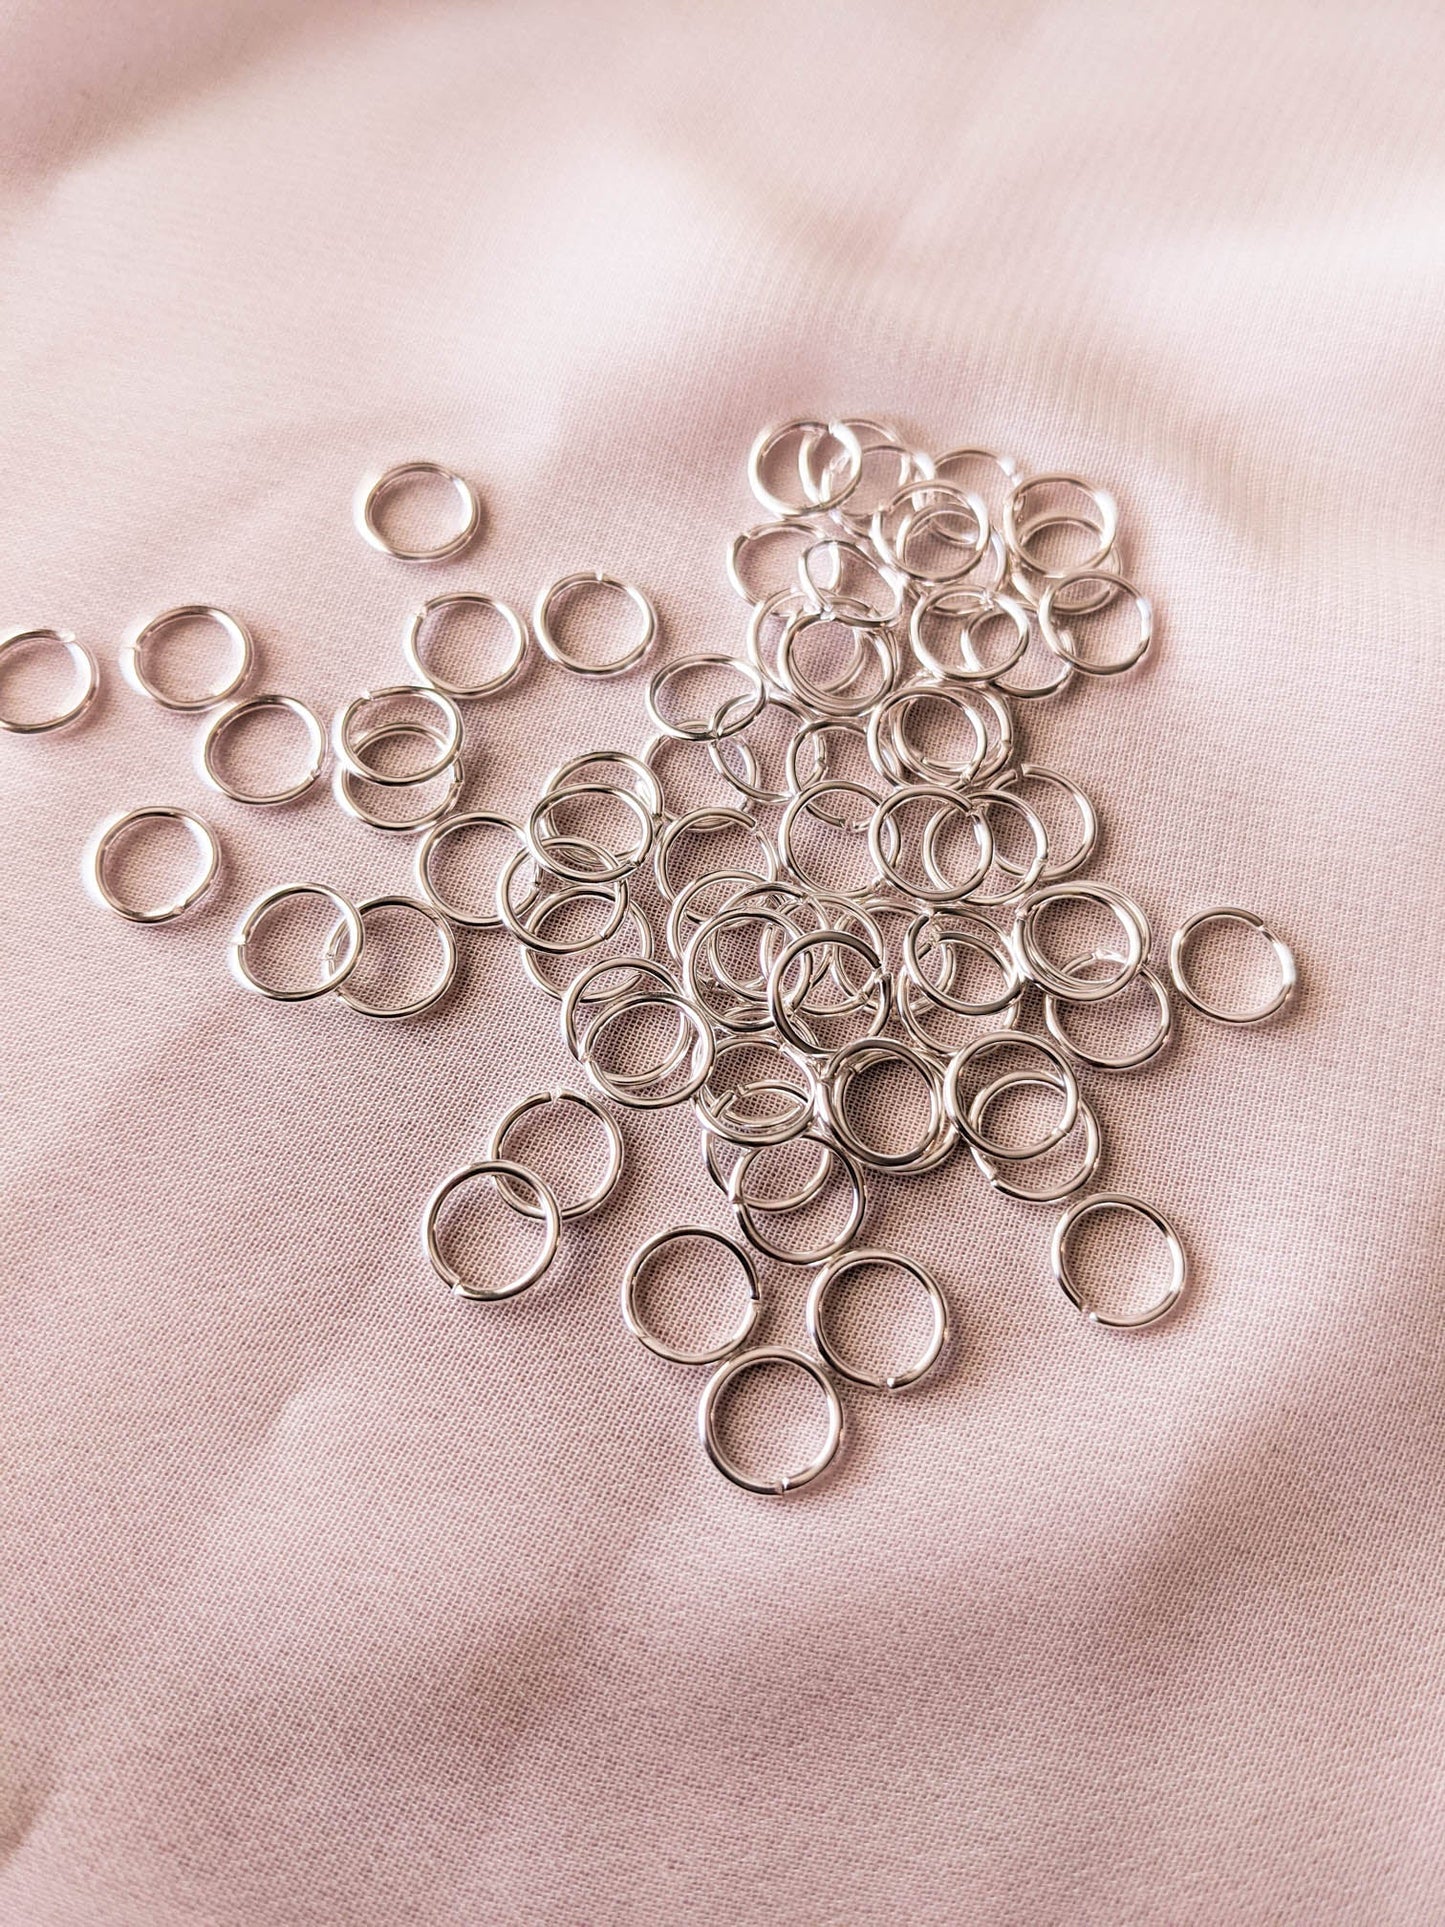 50 Pack - 7mm Jump Rings - Silver Plated Brass - 20 Gauge Wire